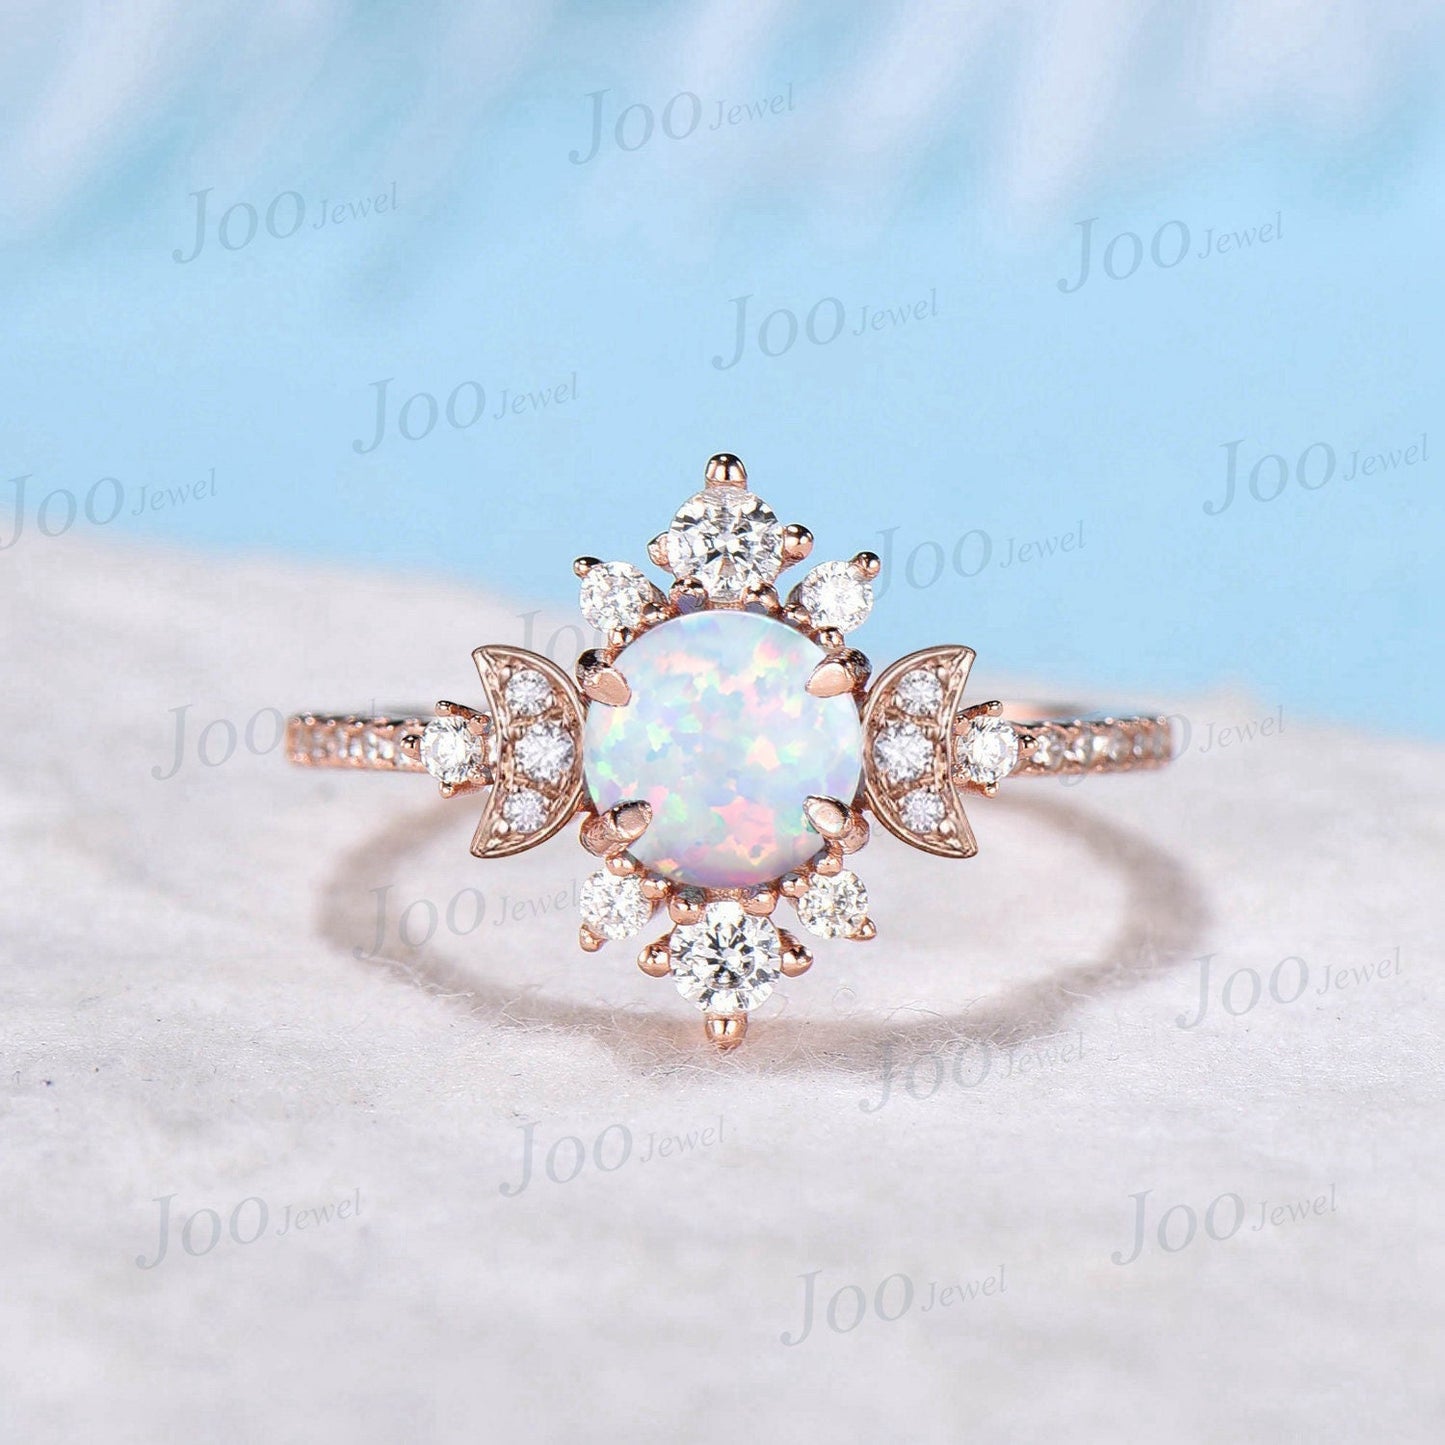 Celestial Opal Engagement Ring Crescent Moon Ring Round Cut Opal Engagement Ring Women Moissanite Wedding Ring Promise Ring Moon Phase Ring